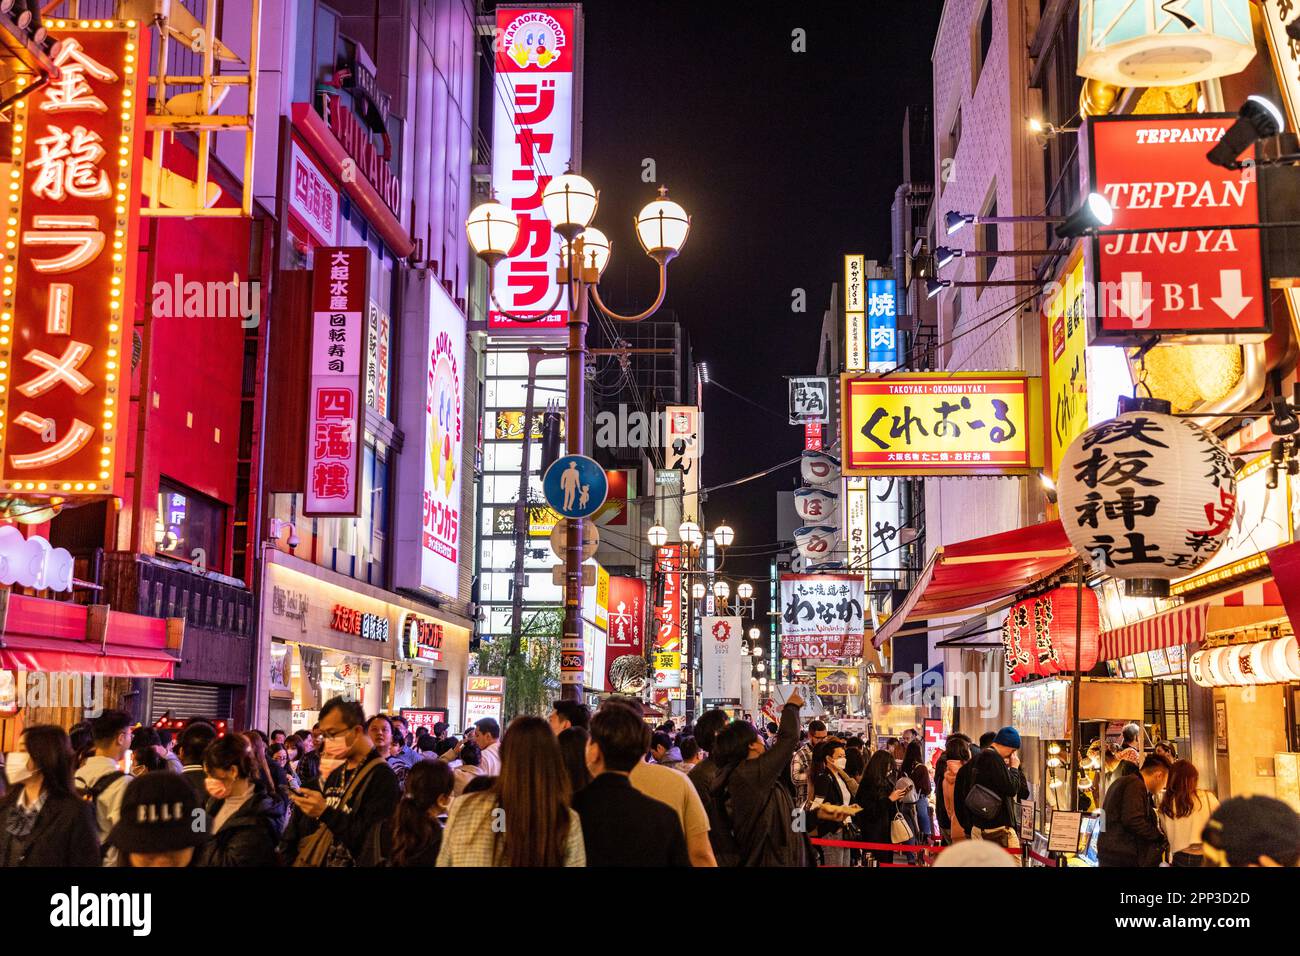 Osaka nightlife April 2023, crowds in Dotonbori district after sunset, with famous neon illuminated streets of Osaka, Japan, spring evening,Asia Stock Photo